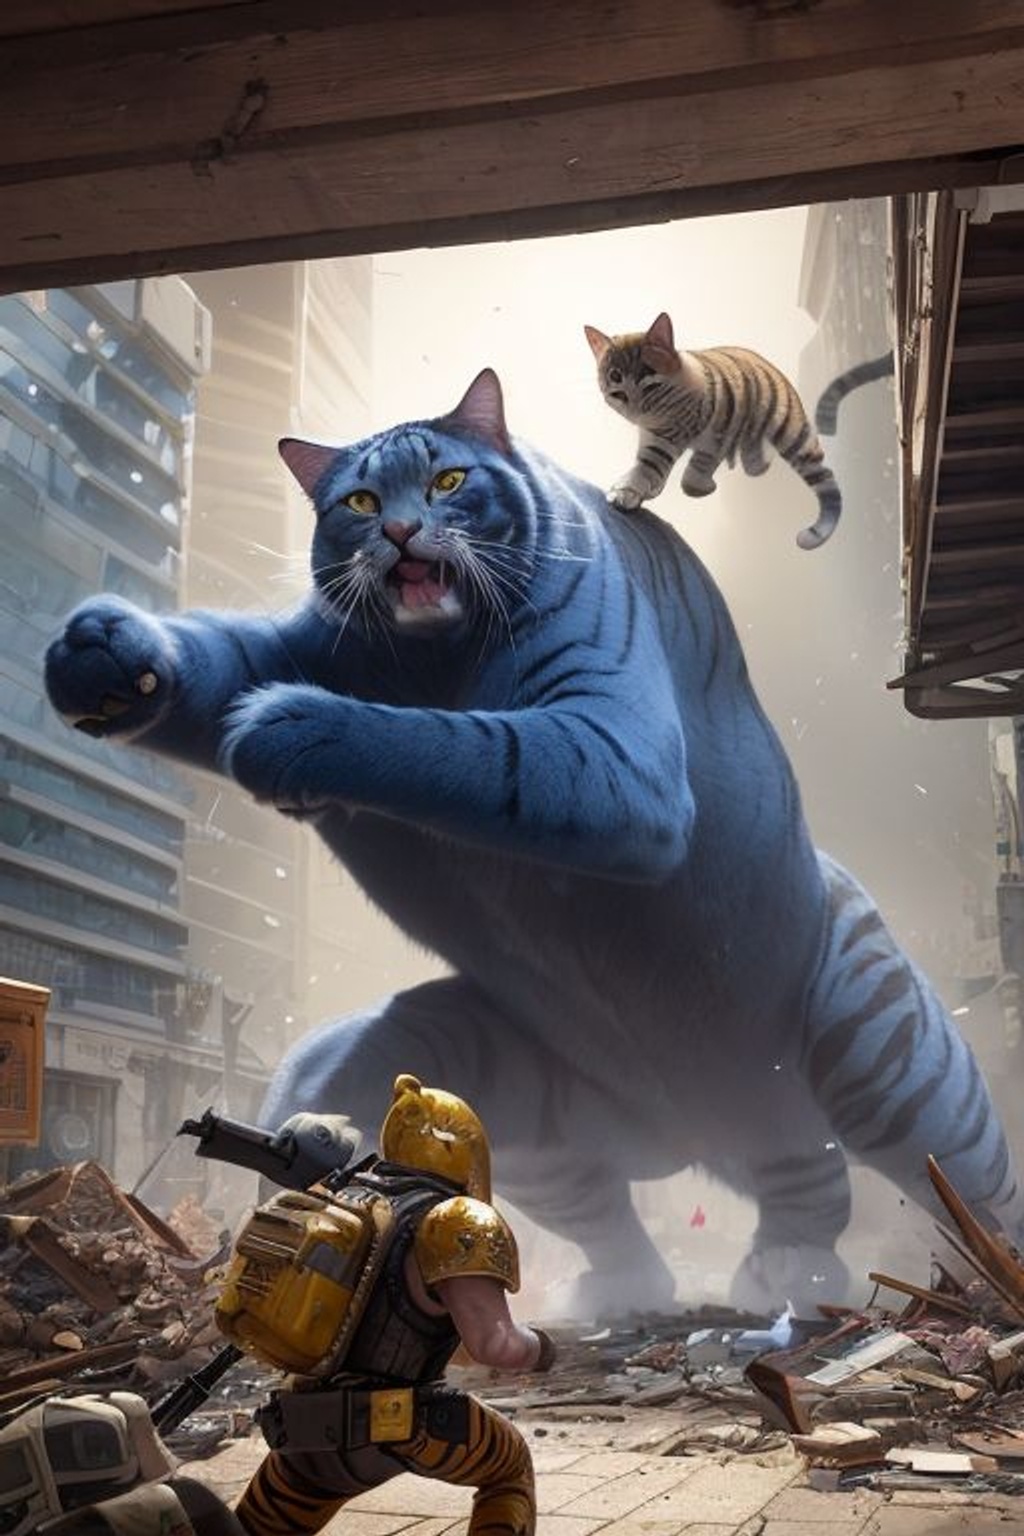 Prompt: ((Best quality)), ((masterpiece)), an ((illustration)) by the talented artist Leonid Kozienkod that showcases stunning realism. In this artwork, an angry giant cute cat attacks a building, causing chaos and destruction in a cityscape. The illustration captures the intensity of the cat's attack, with motion blur emphasizing its swift movements. Alongside the giant cat, numerous other cats join the rampage, creating a scene filled with feline fury